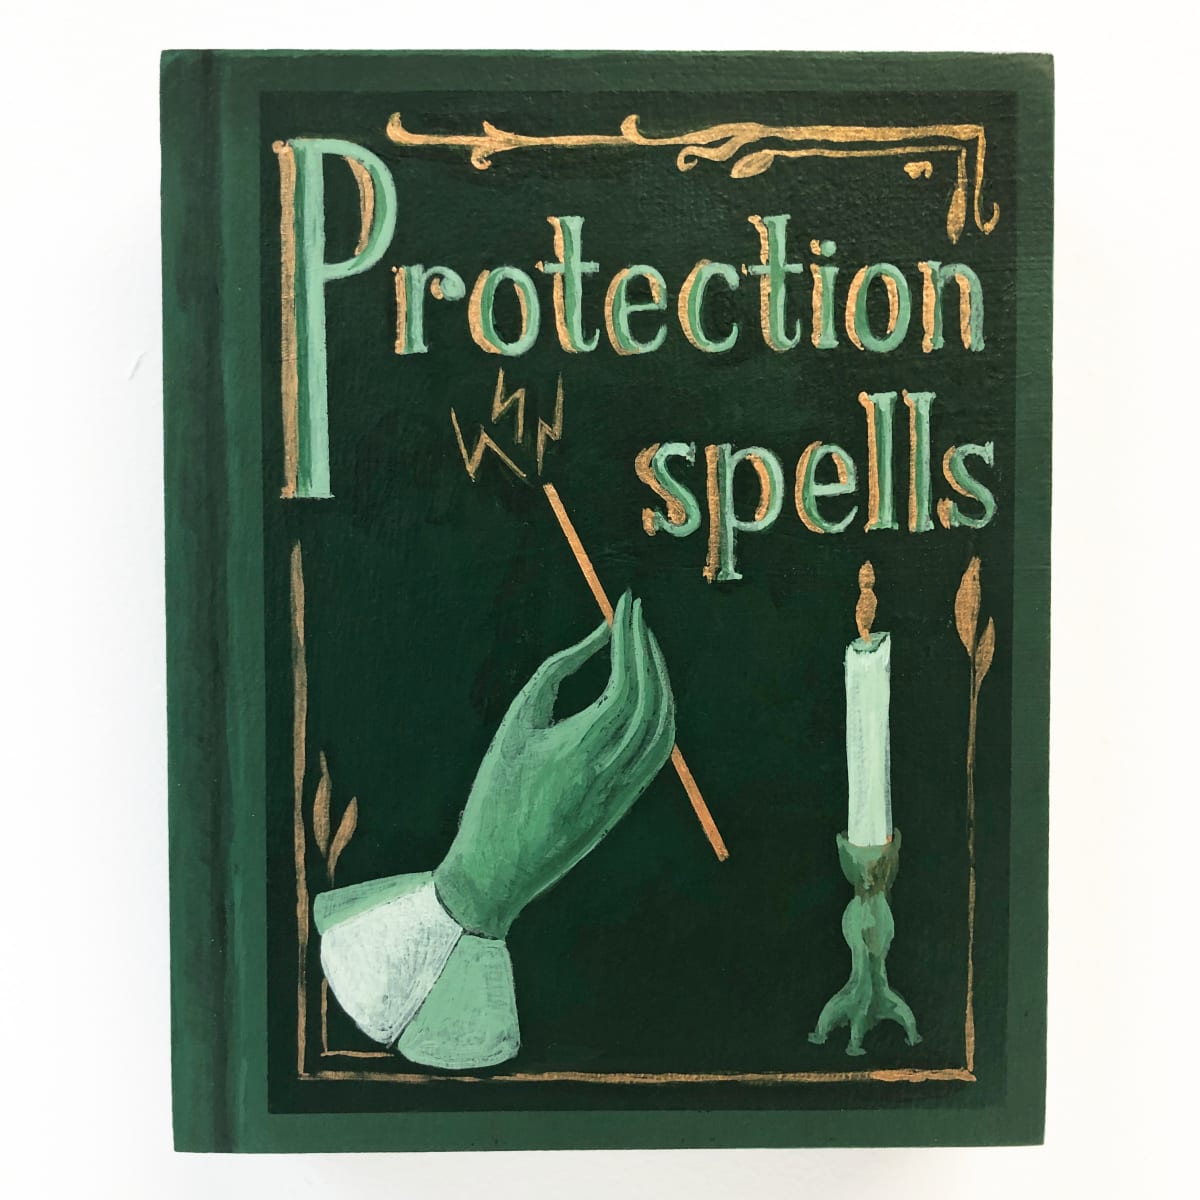 Protection Spells by rebecca chaperon 